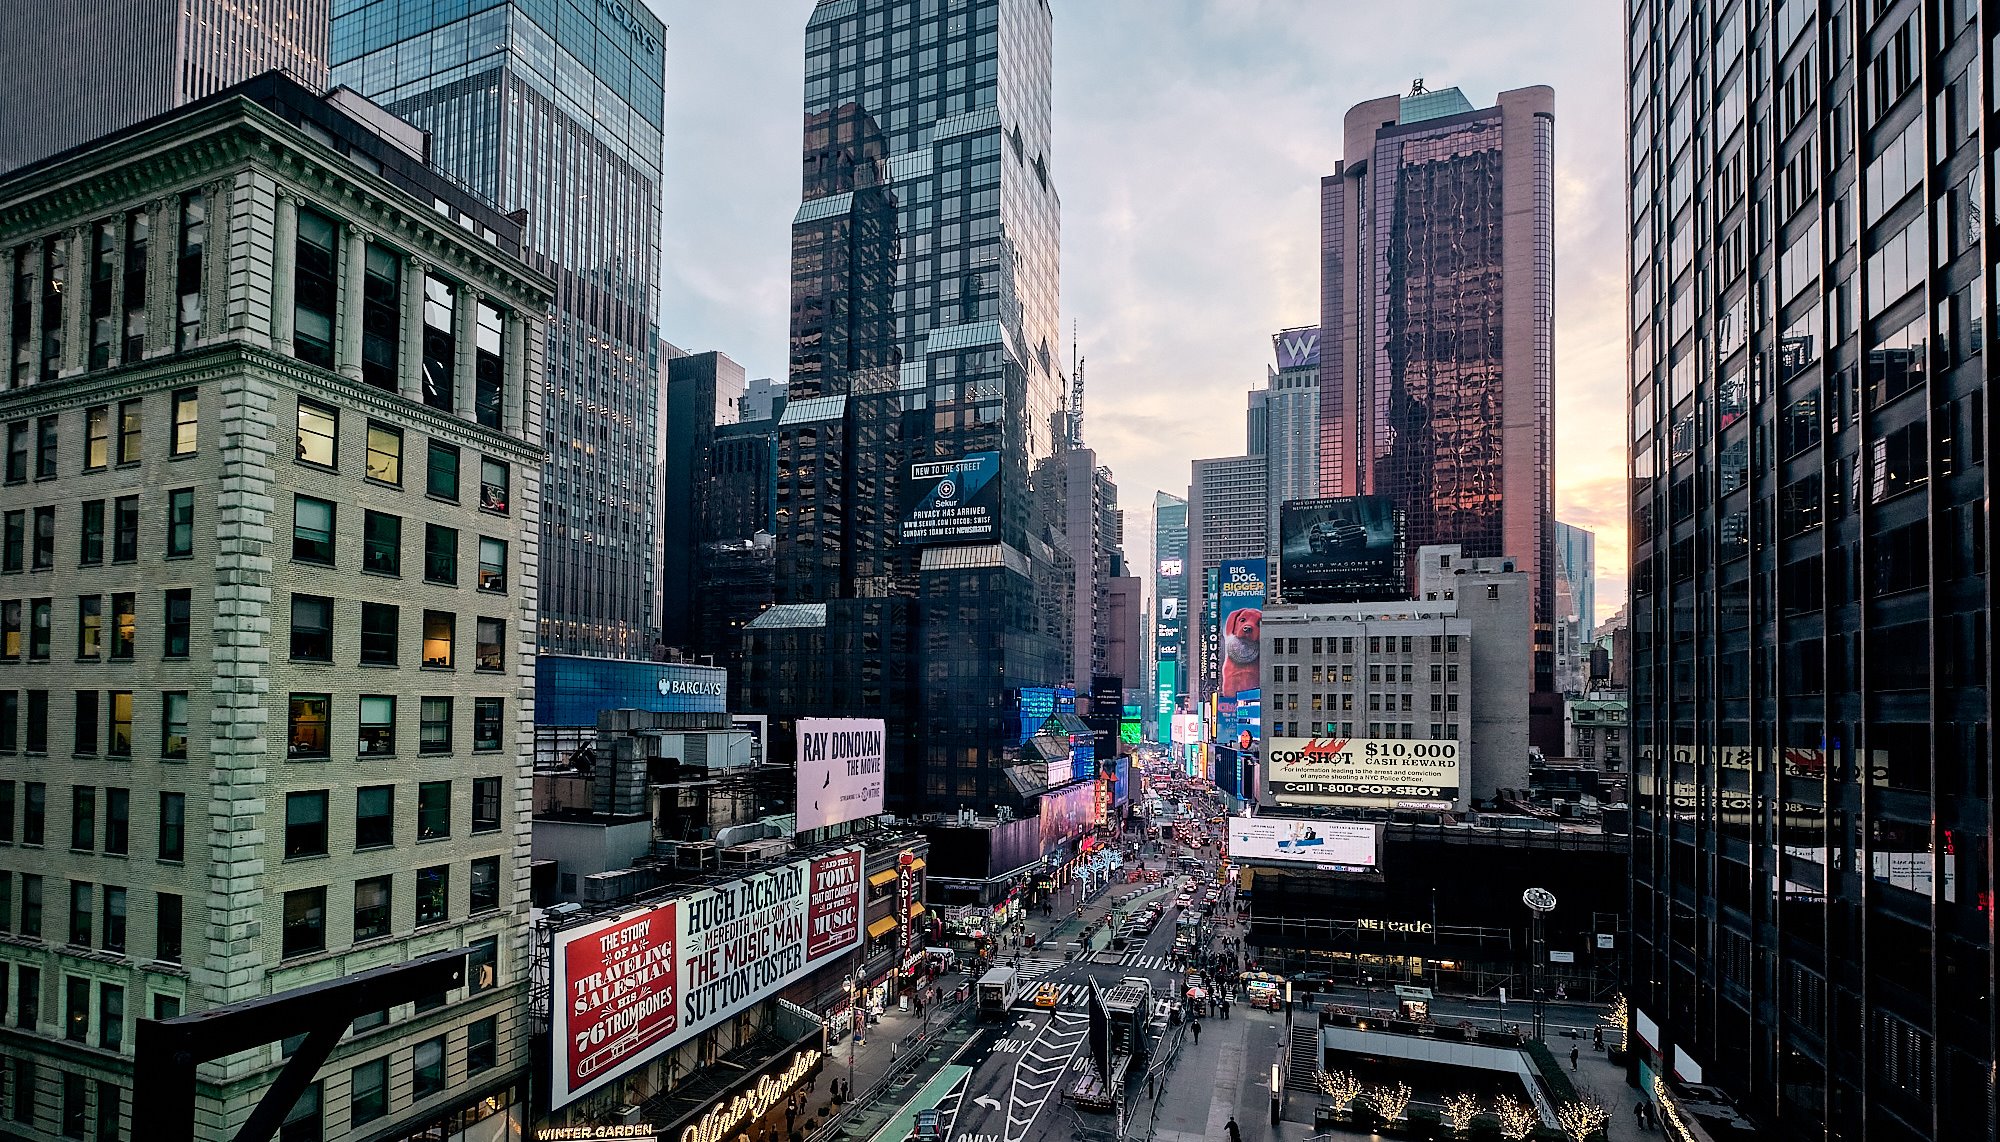 Read New York is still as magical as ever by Fabien Bazanegue